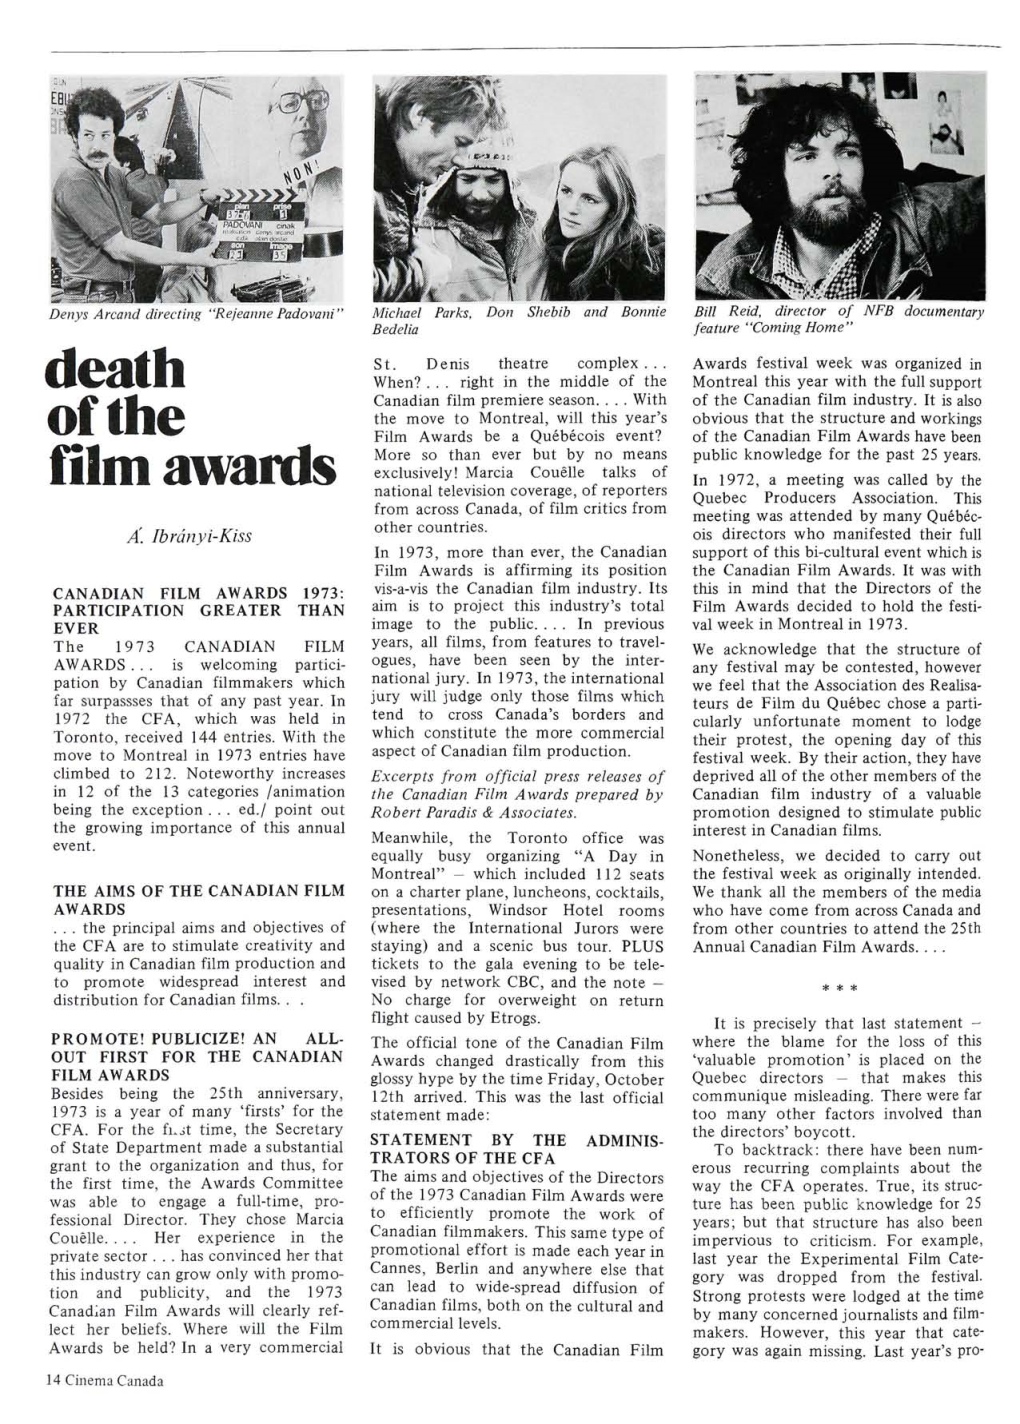 Death of the Film Awards